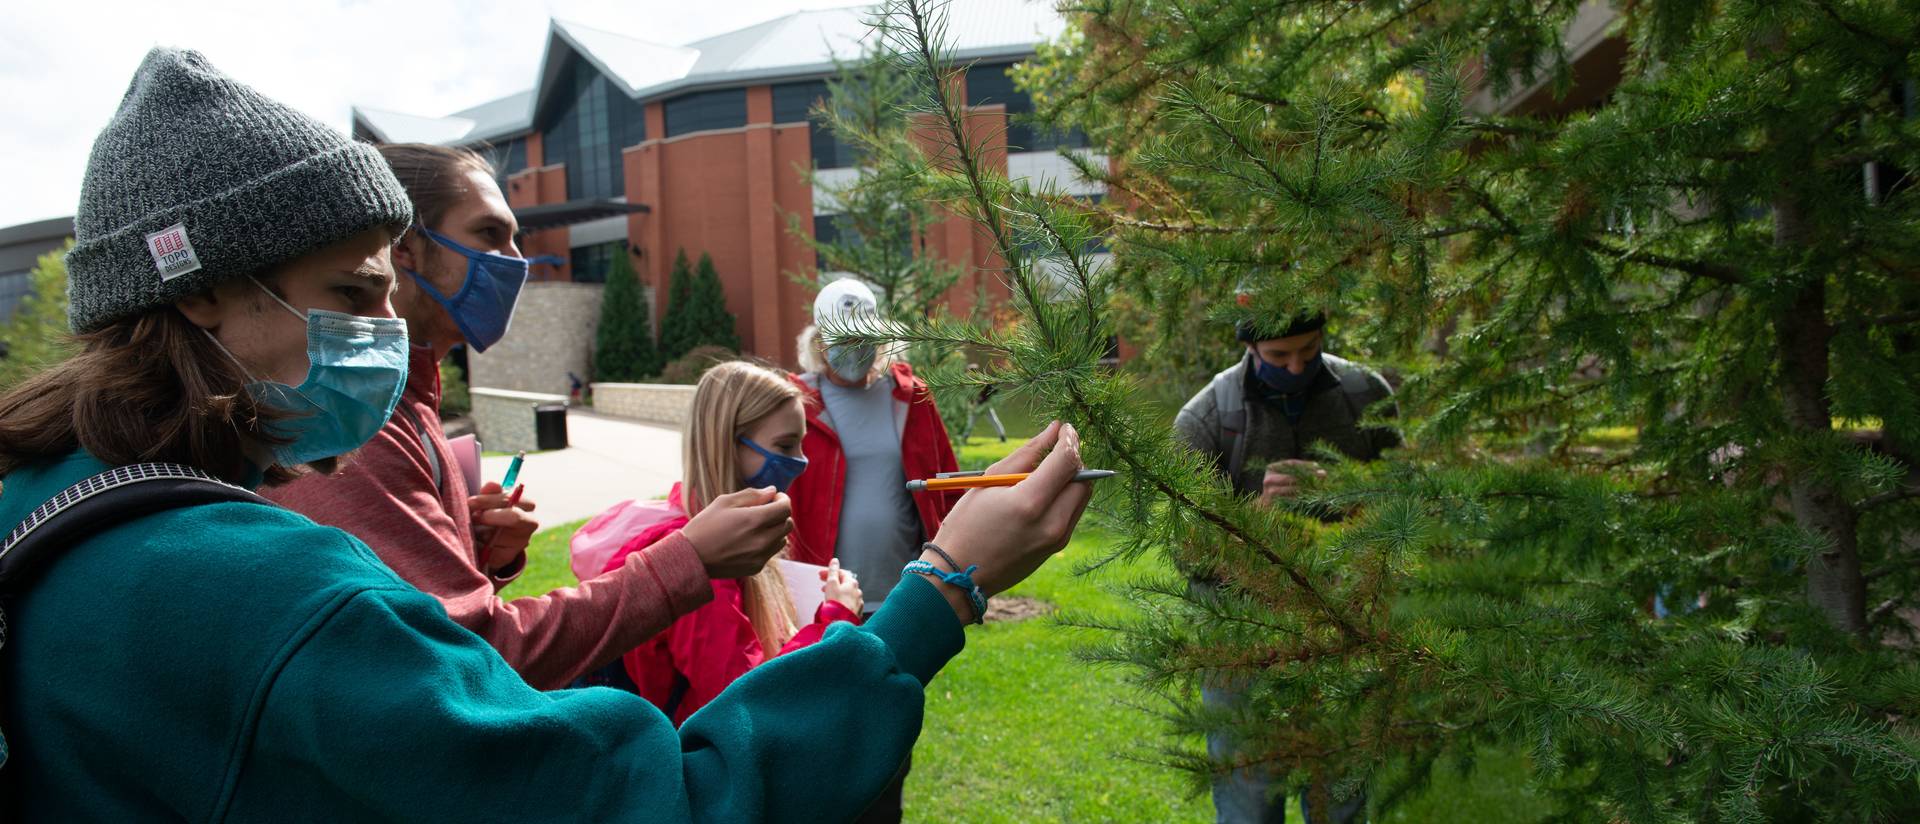 Students in an outdoor class examine a pine tree on campus